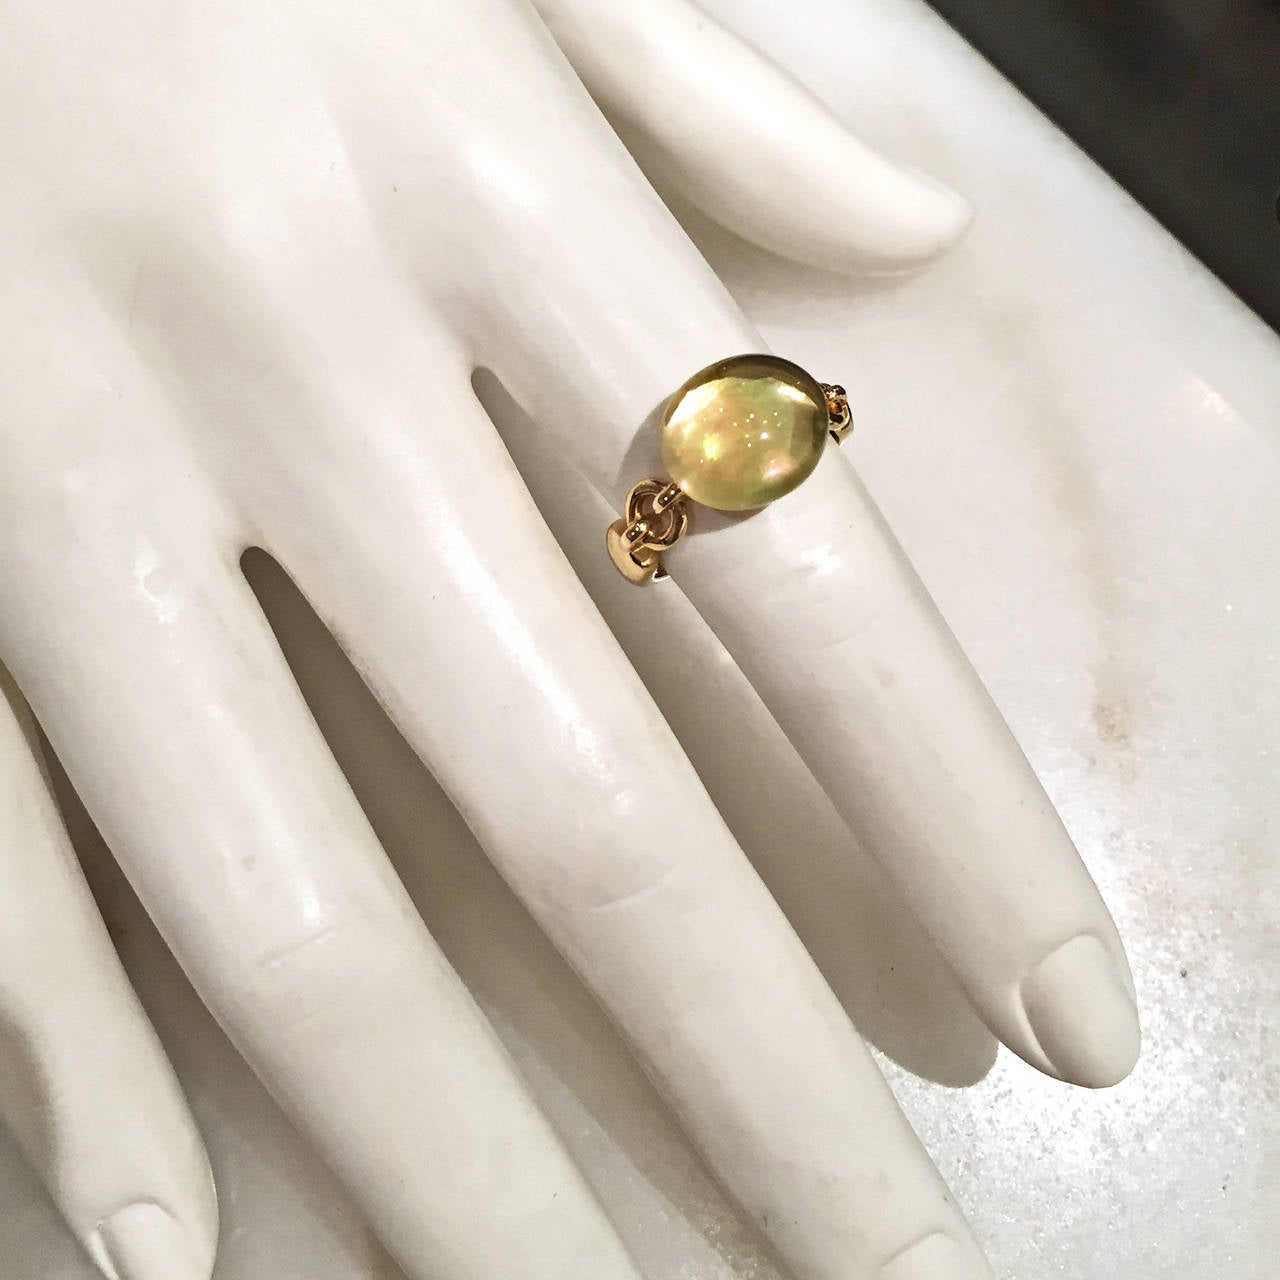 Handcrafted Iridescent Ring hancrafted in shiny 18k yellow gold with a cabochon-cut lemon quartz laid of a mother-of-pearl slice. Size 6.25 (Can be Sized).